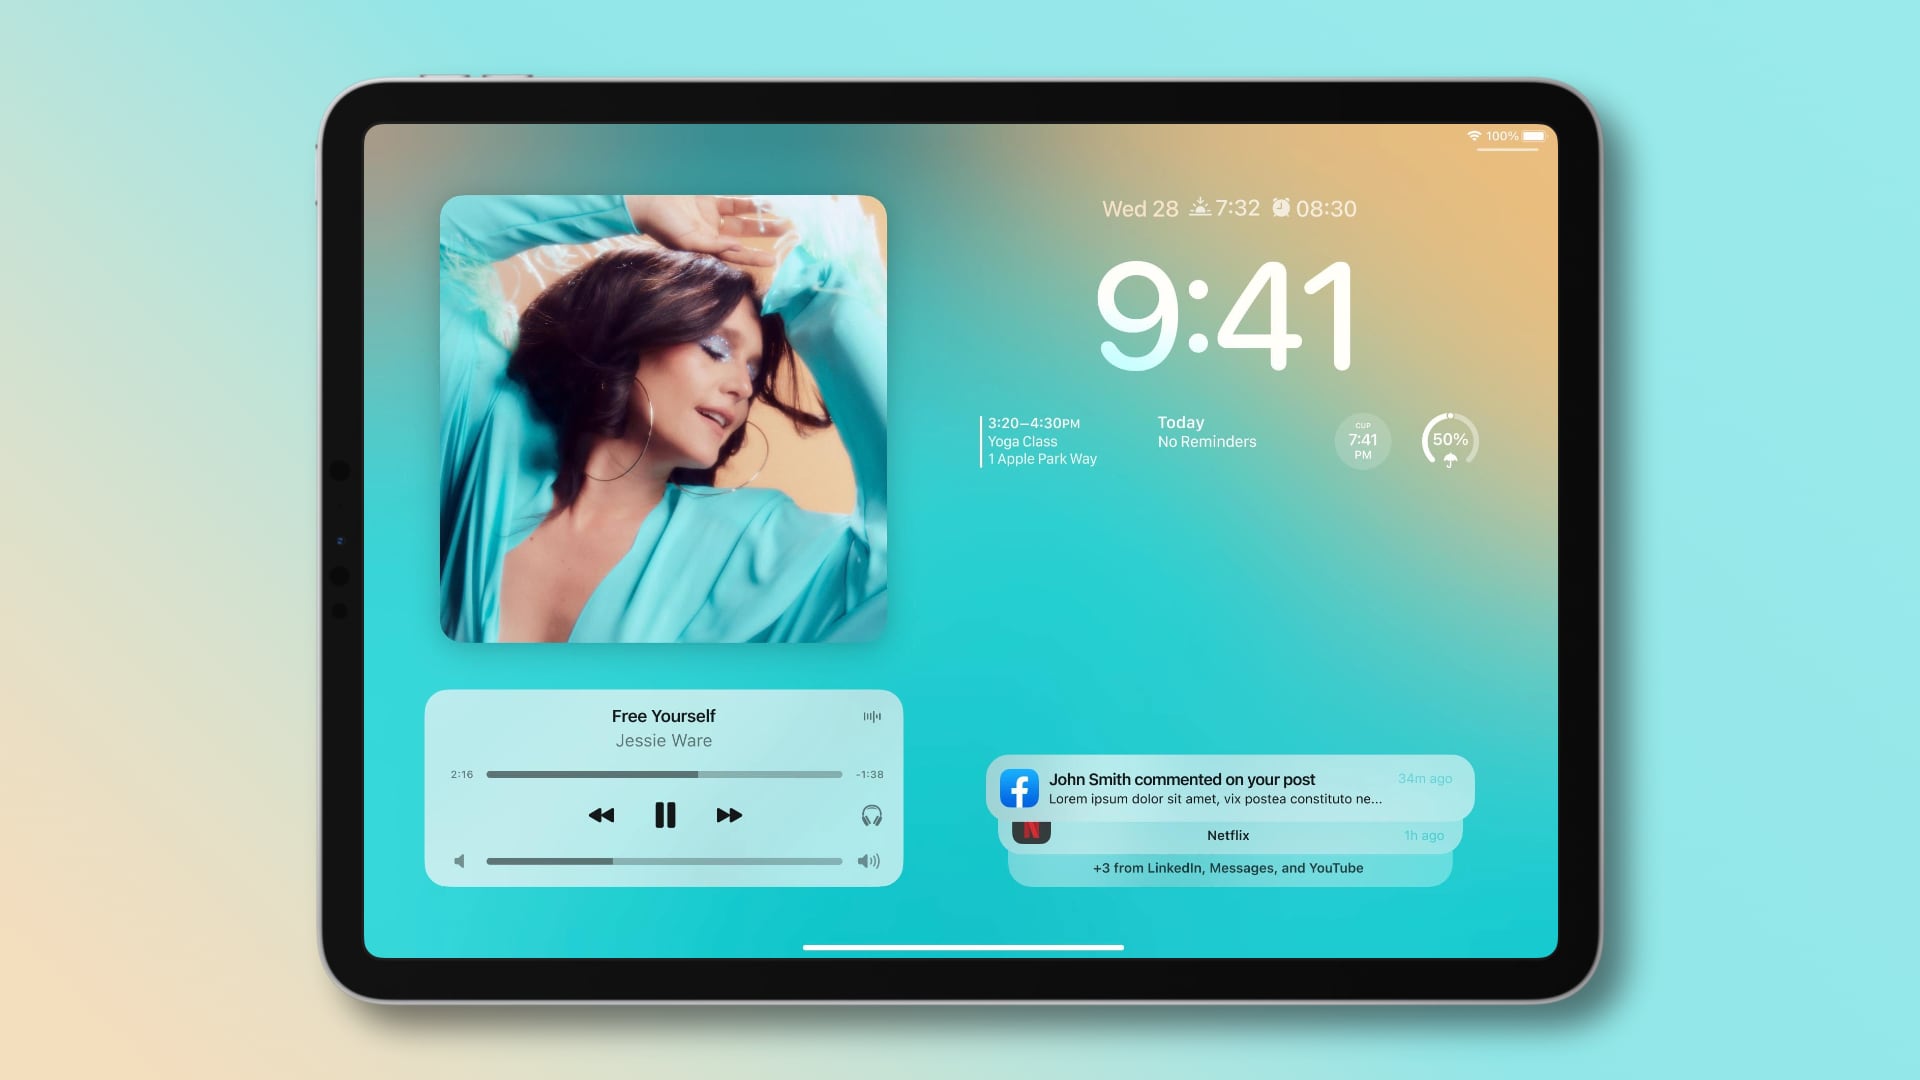 Concept artwork imagining an iPhone-like Lock Screen design on iPad with a 2-column layout